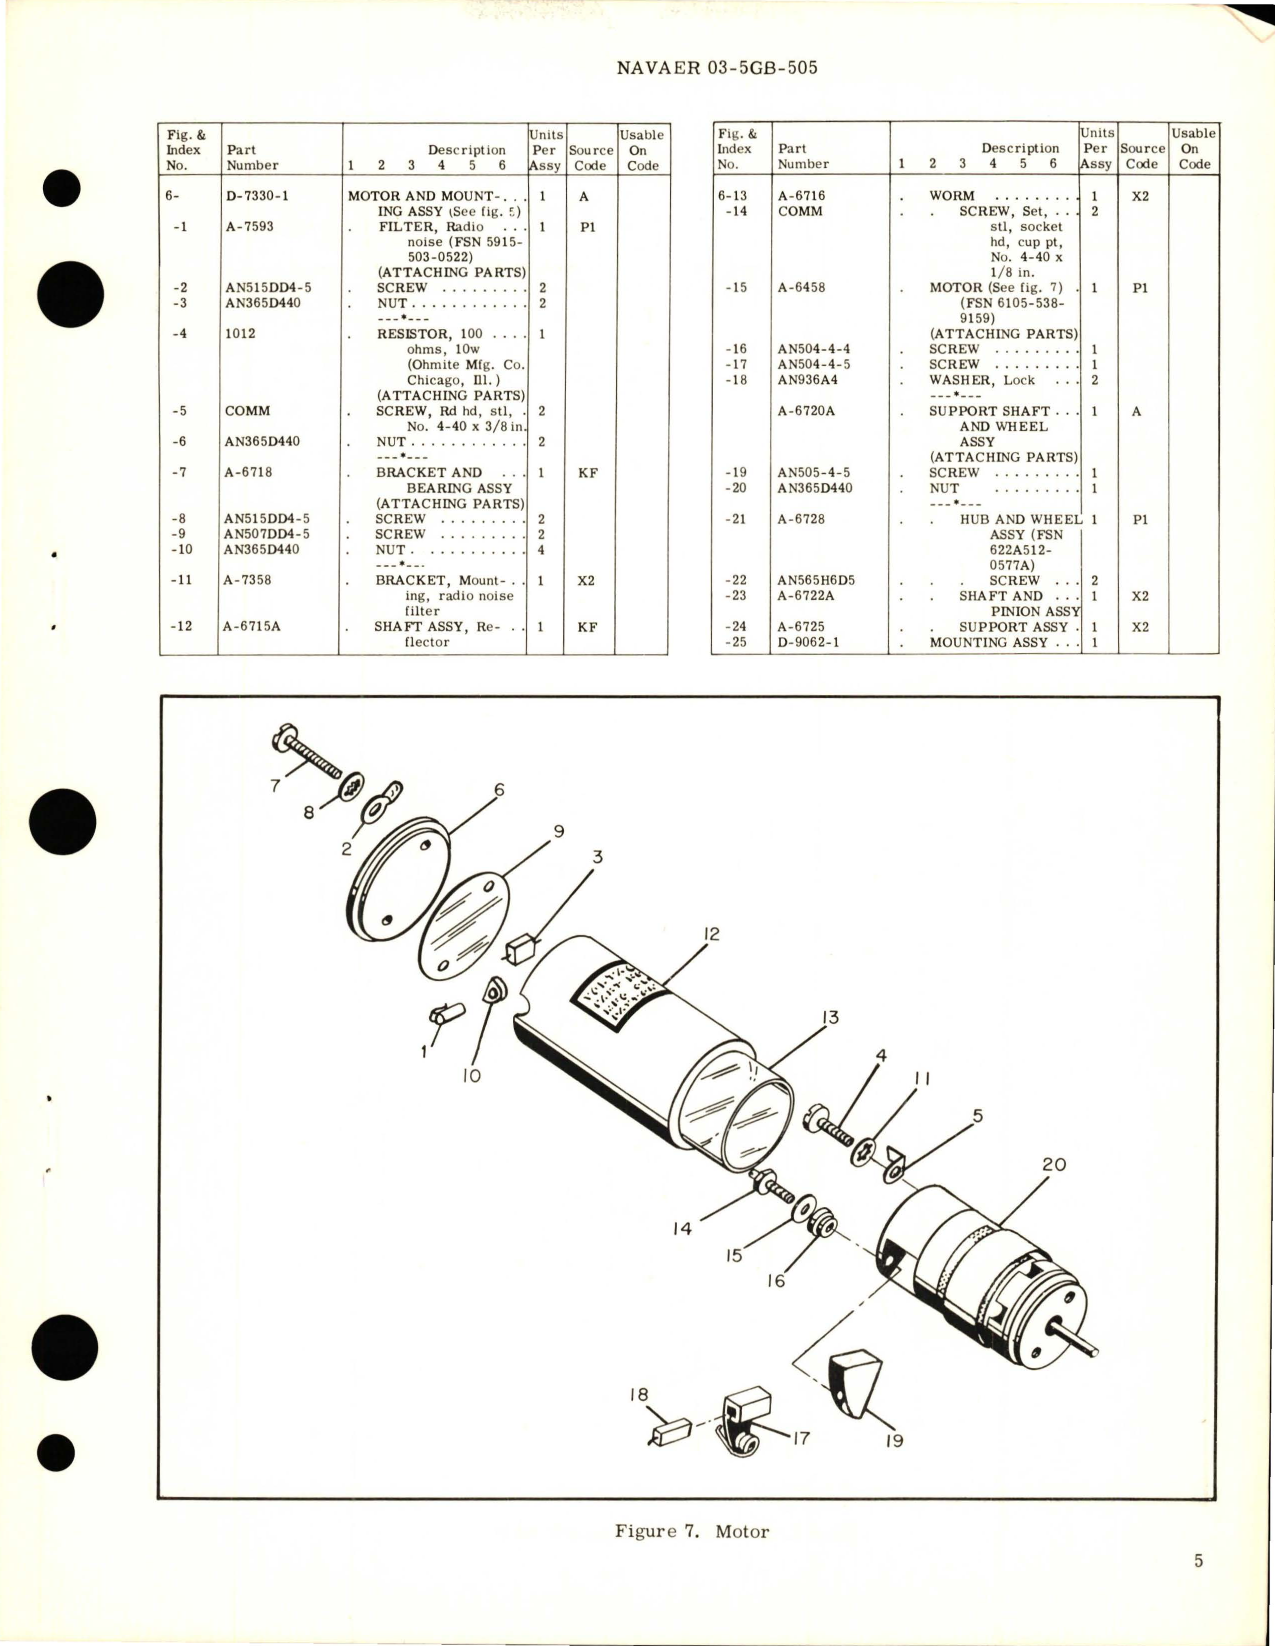 Sample page 5 from AirCorps Library document: Overhaul Instructions with Parts Breakdown for Rotating Warning Navigational Light - Parts G-6965-11 and G-6965-31